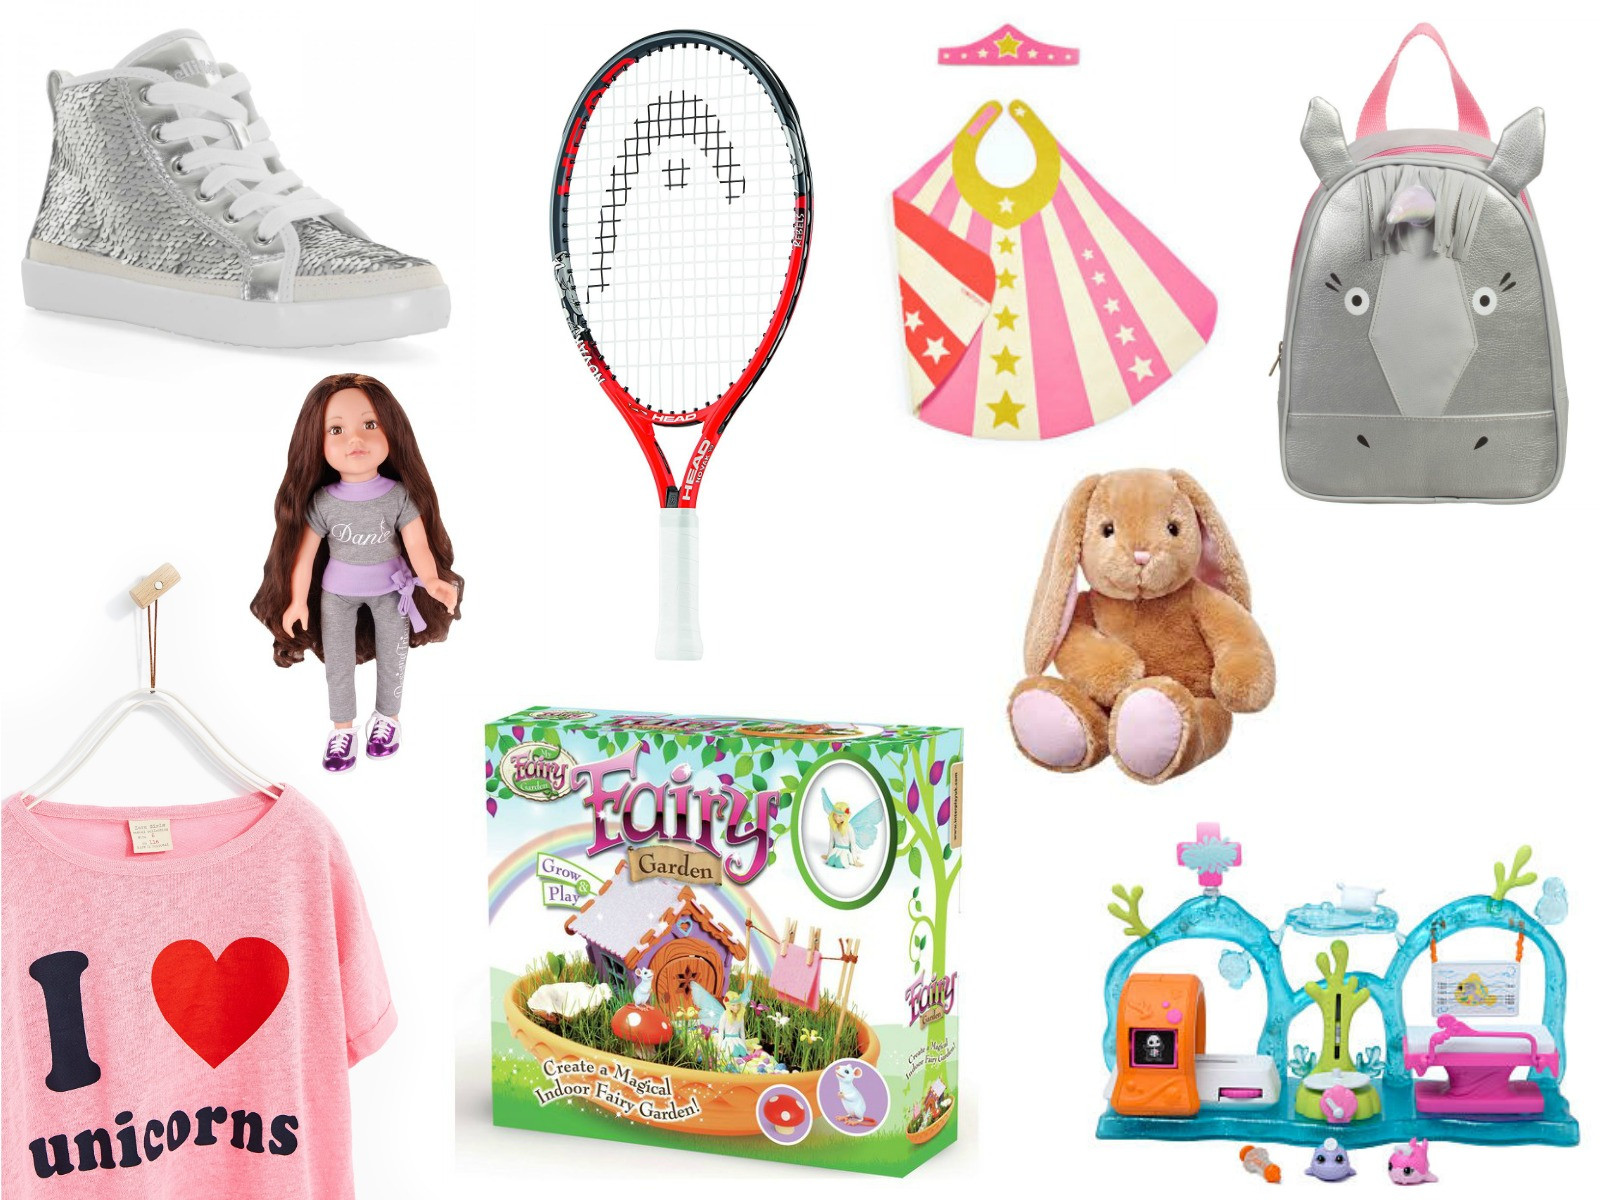 Gift Ideas For 5 Year Old Birthday Girl
 Presents for a five year old Girl